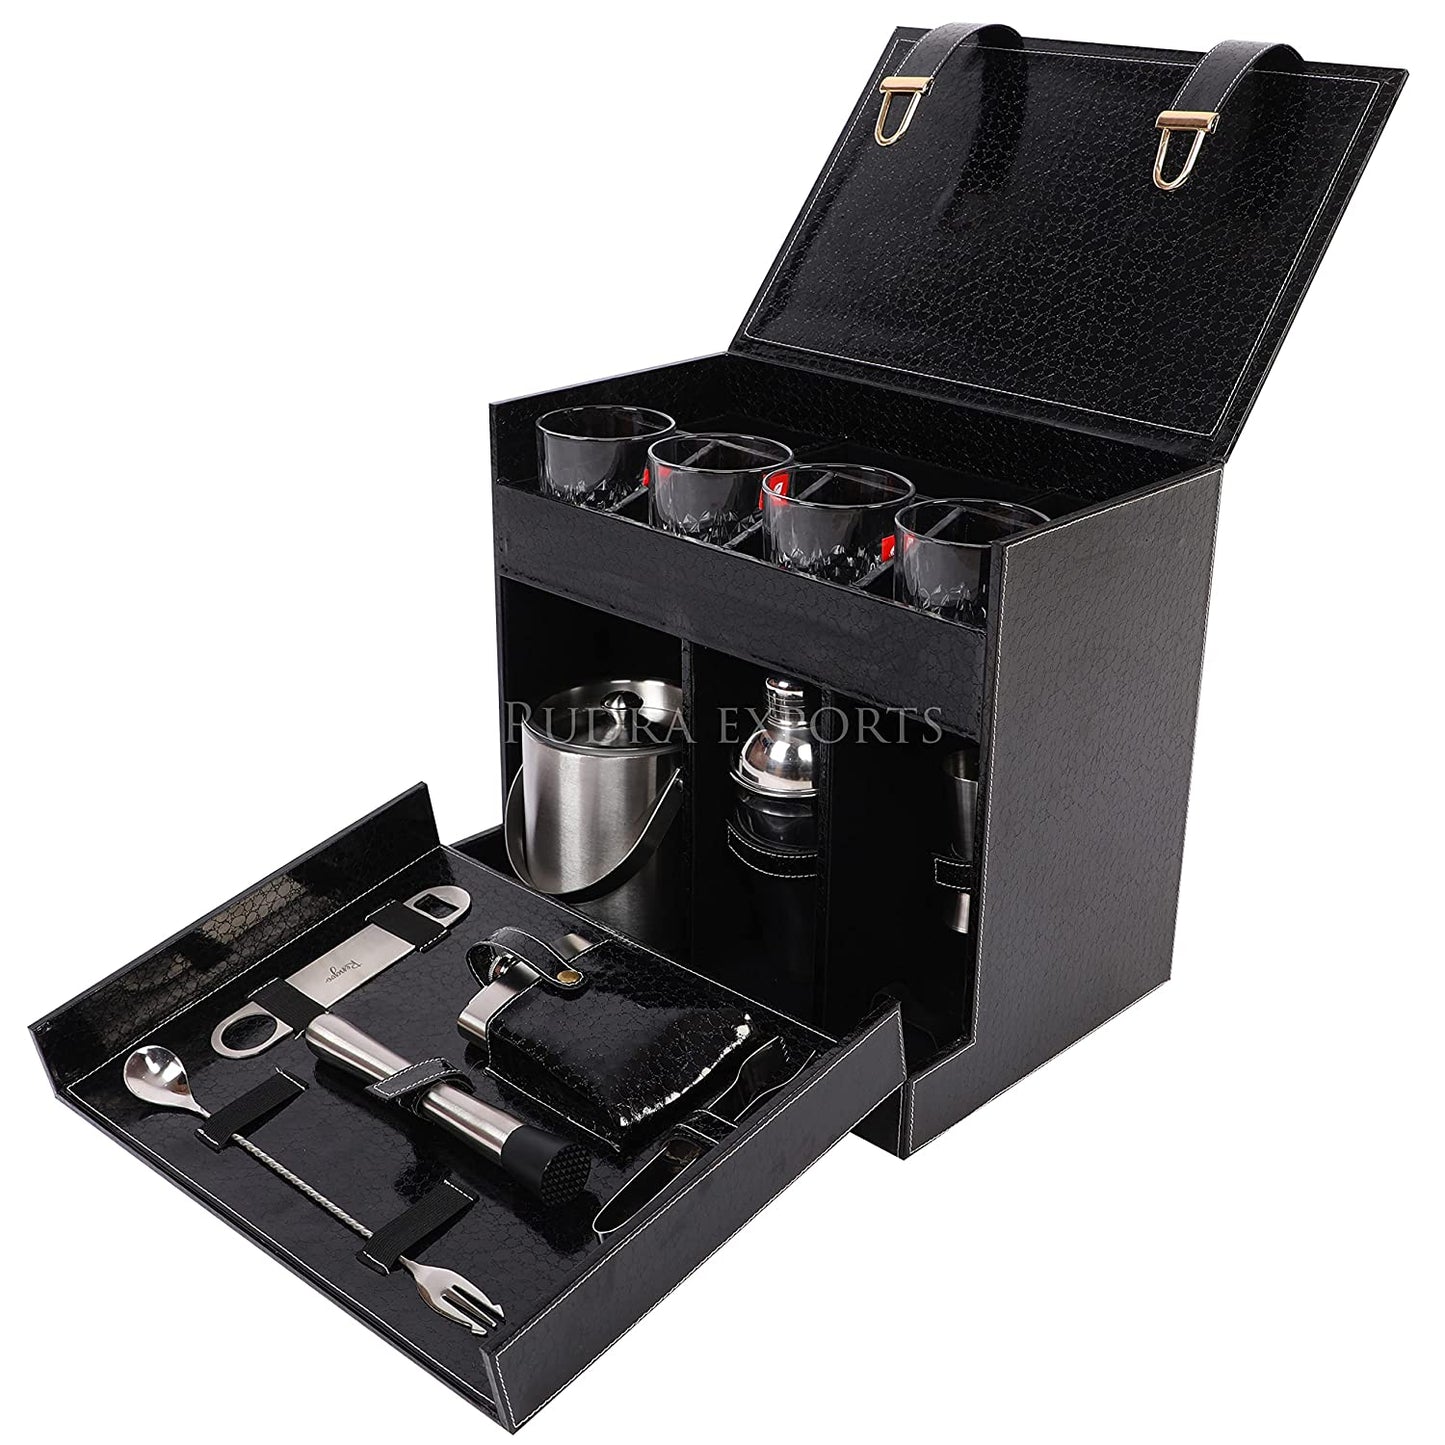 Rudra Exports Table Top Vegan Leather Portable Bar Box with Accessories Set & 4 Whisky Glasses | Min Bar for Home (Black)